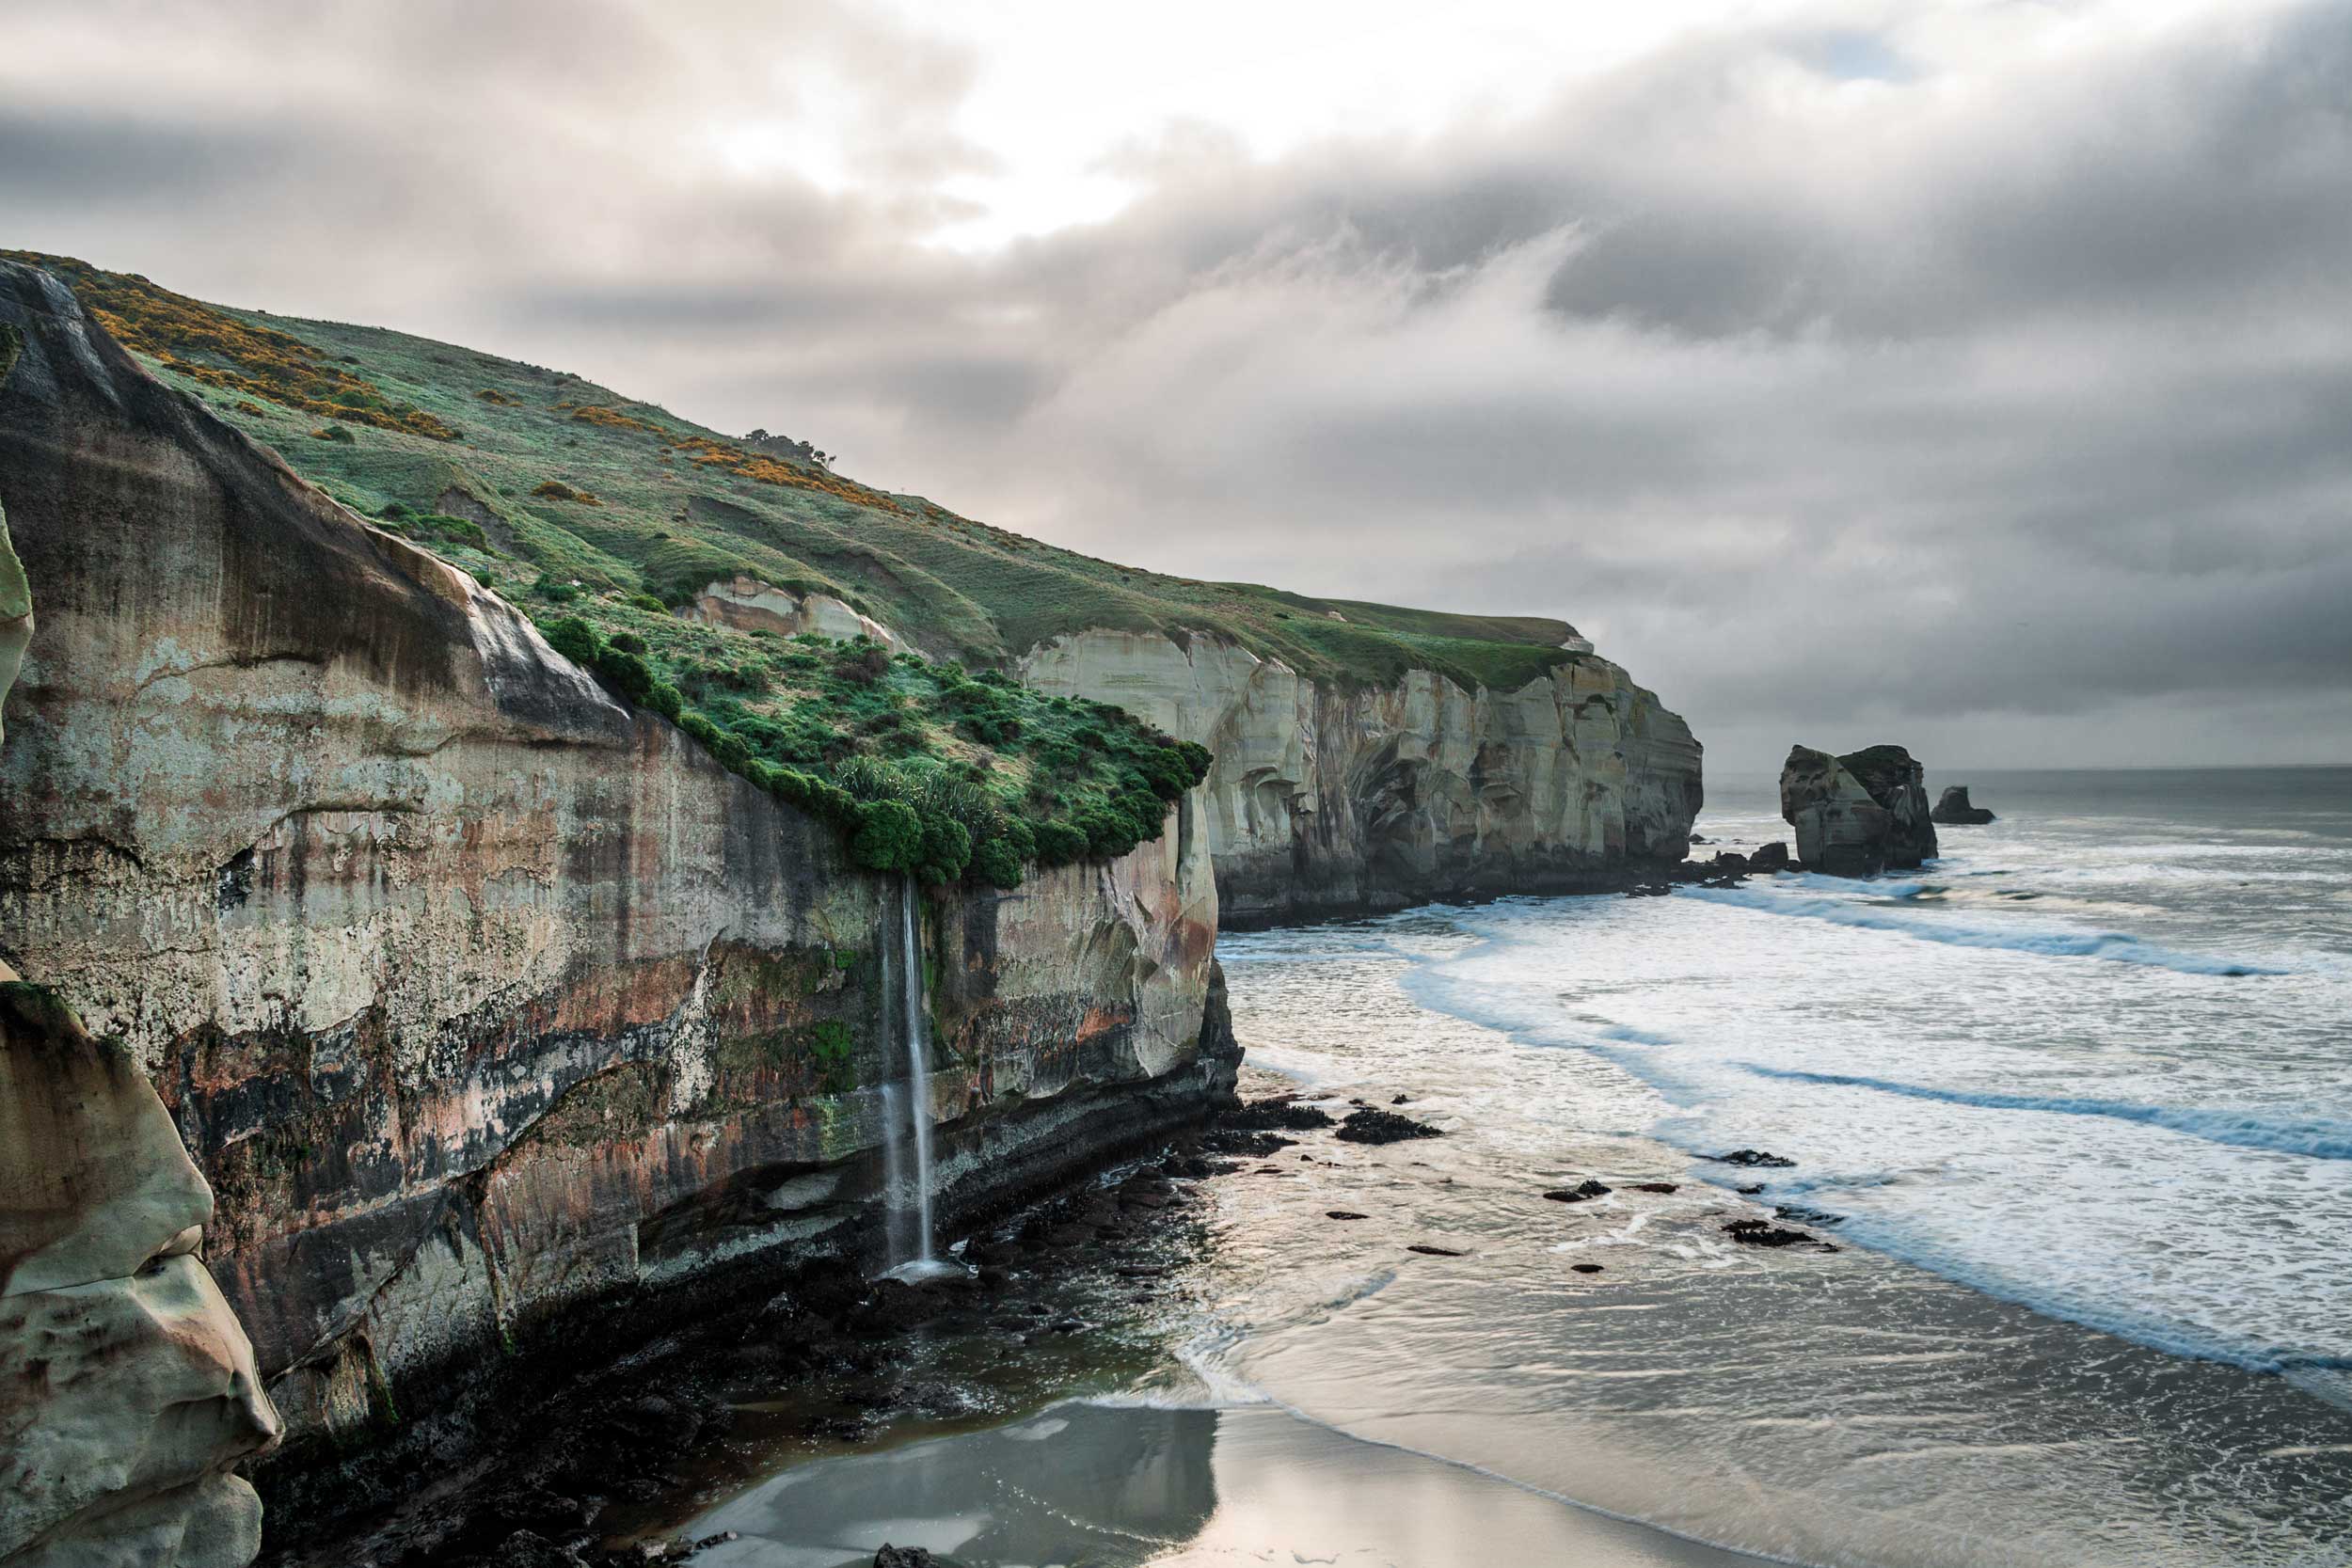 A cliff coastline with a grassy top and a stream of water falling off it onto the sand below, New Zealand